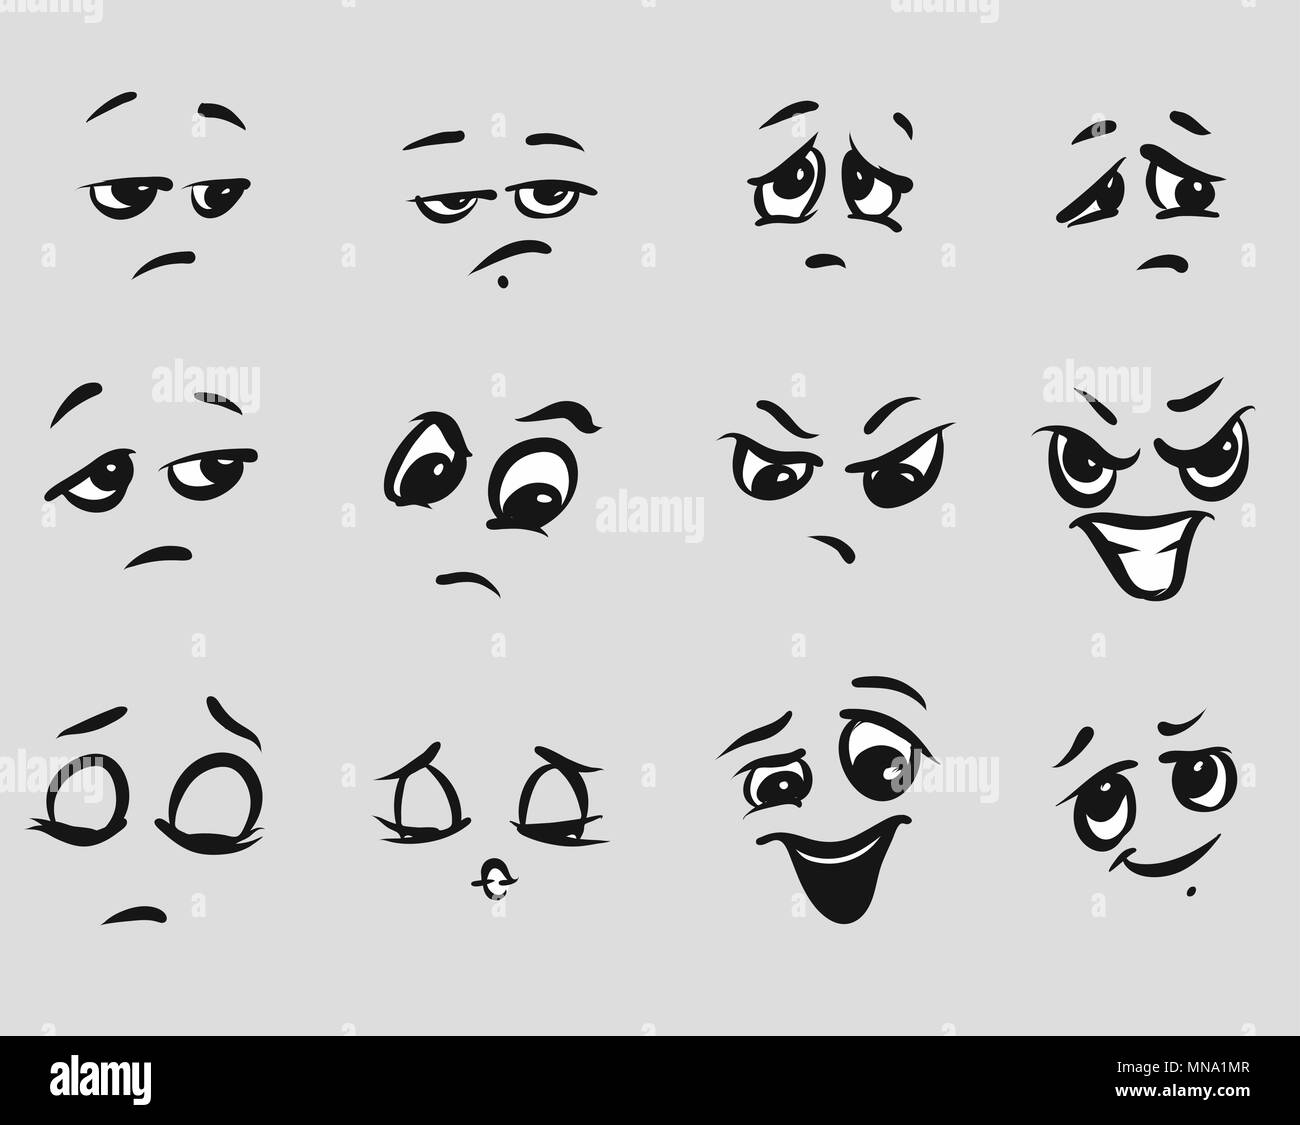 Twelf Angry Cartoon Expressions Faces, Hand-drawn Vector Outline Sketched Artwork Stock Vector